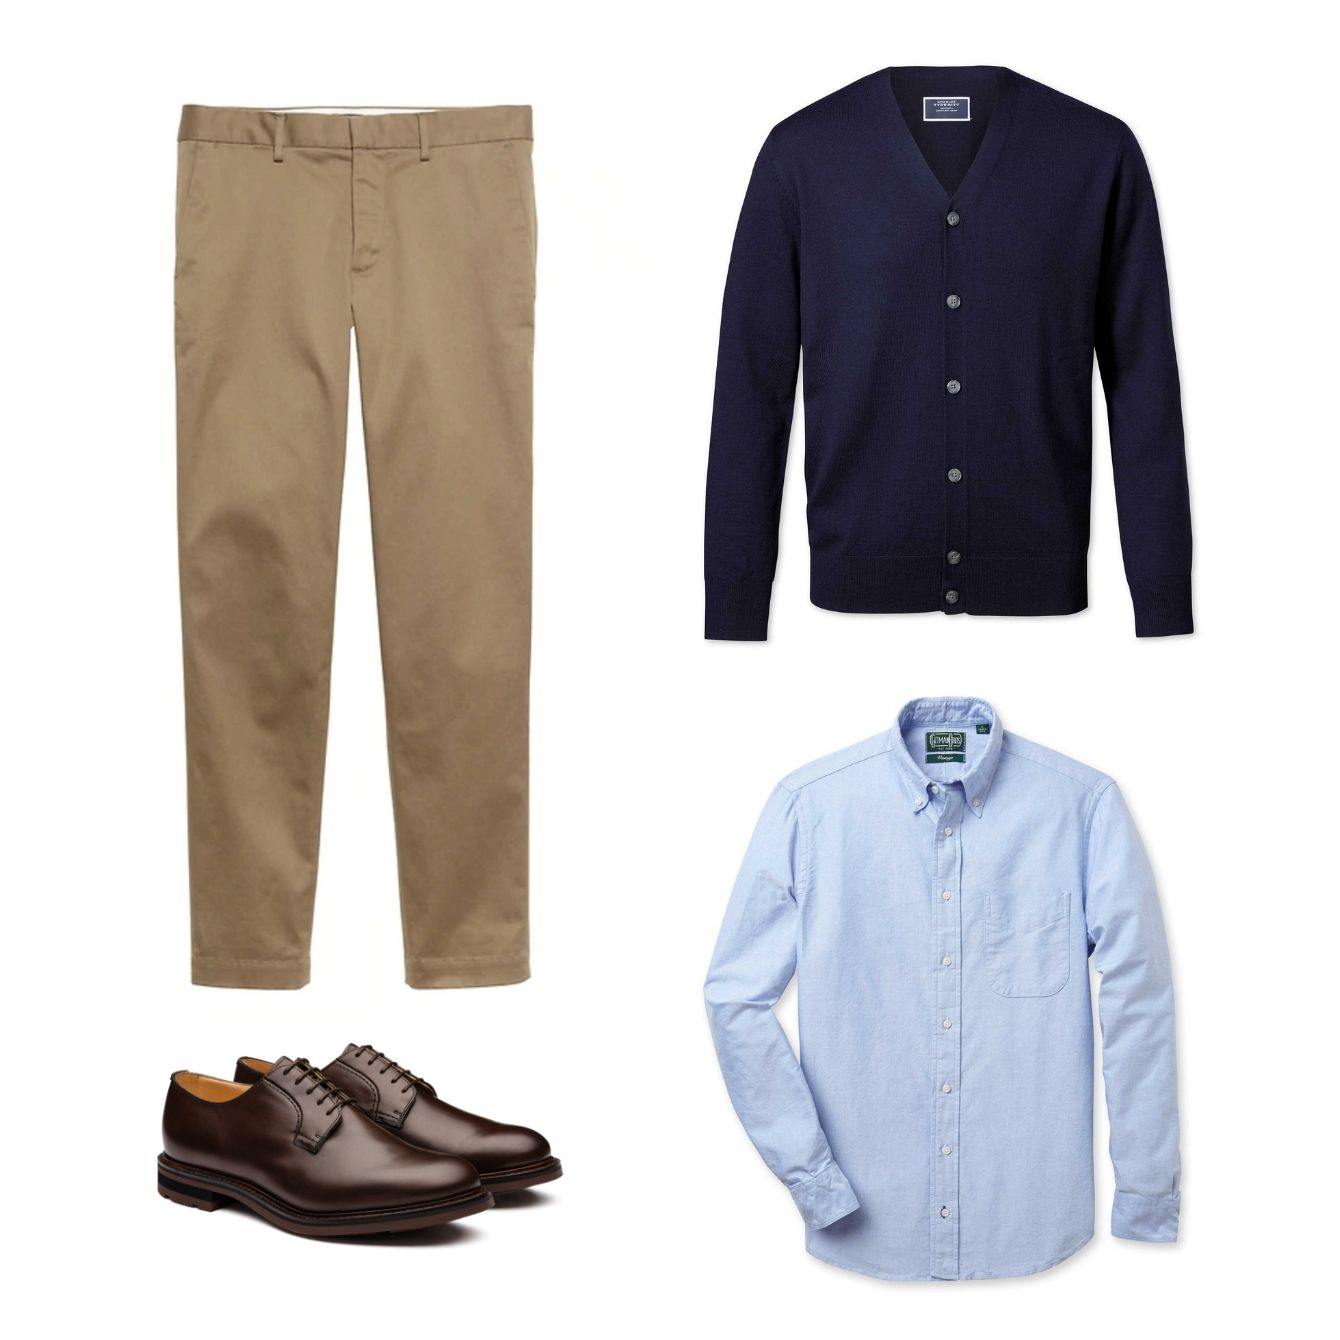 shoes to wear with business casual